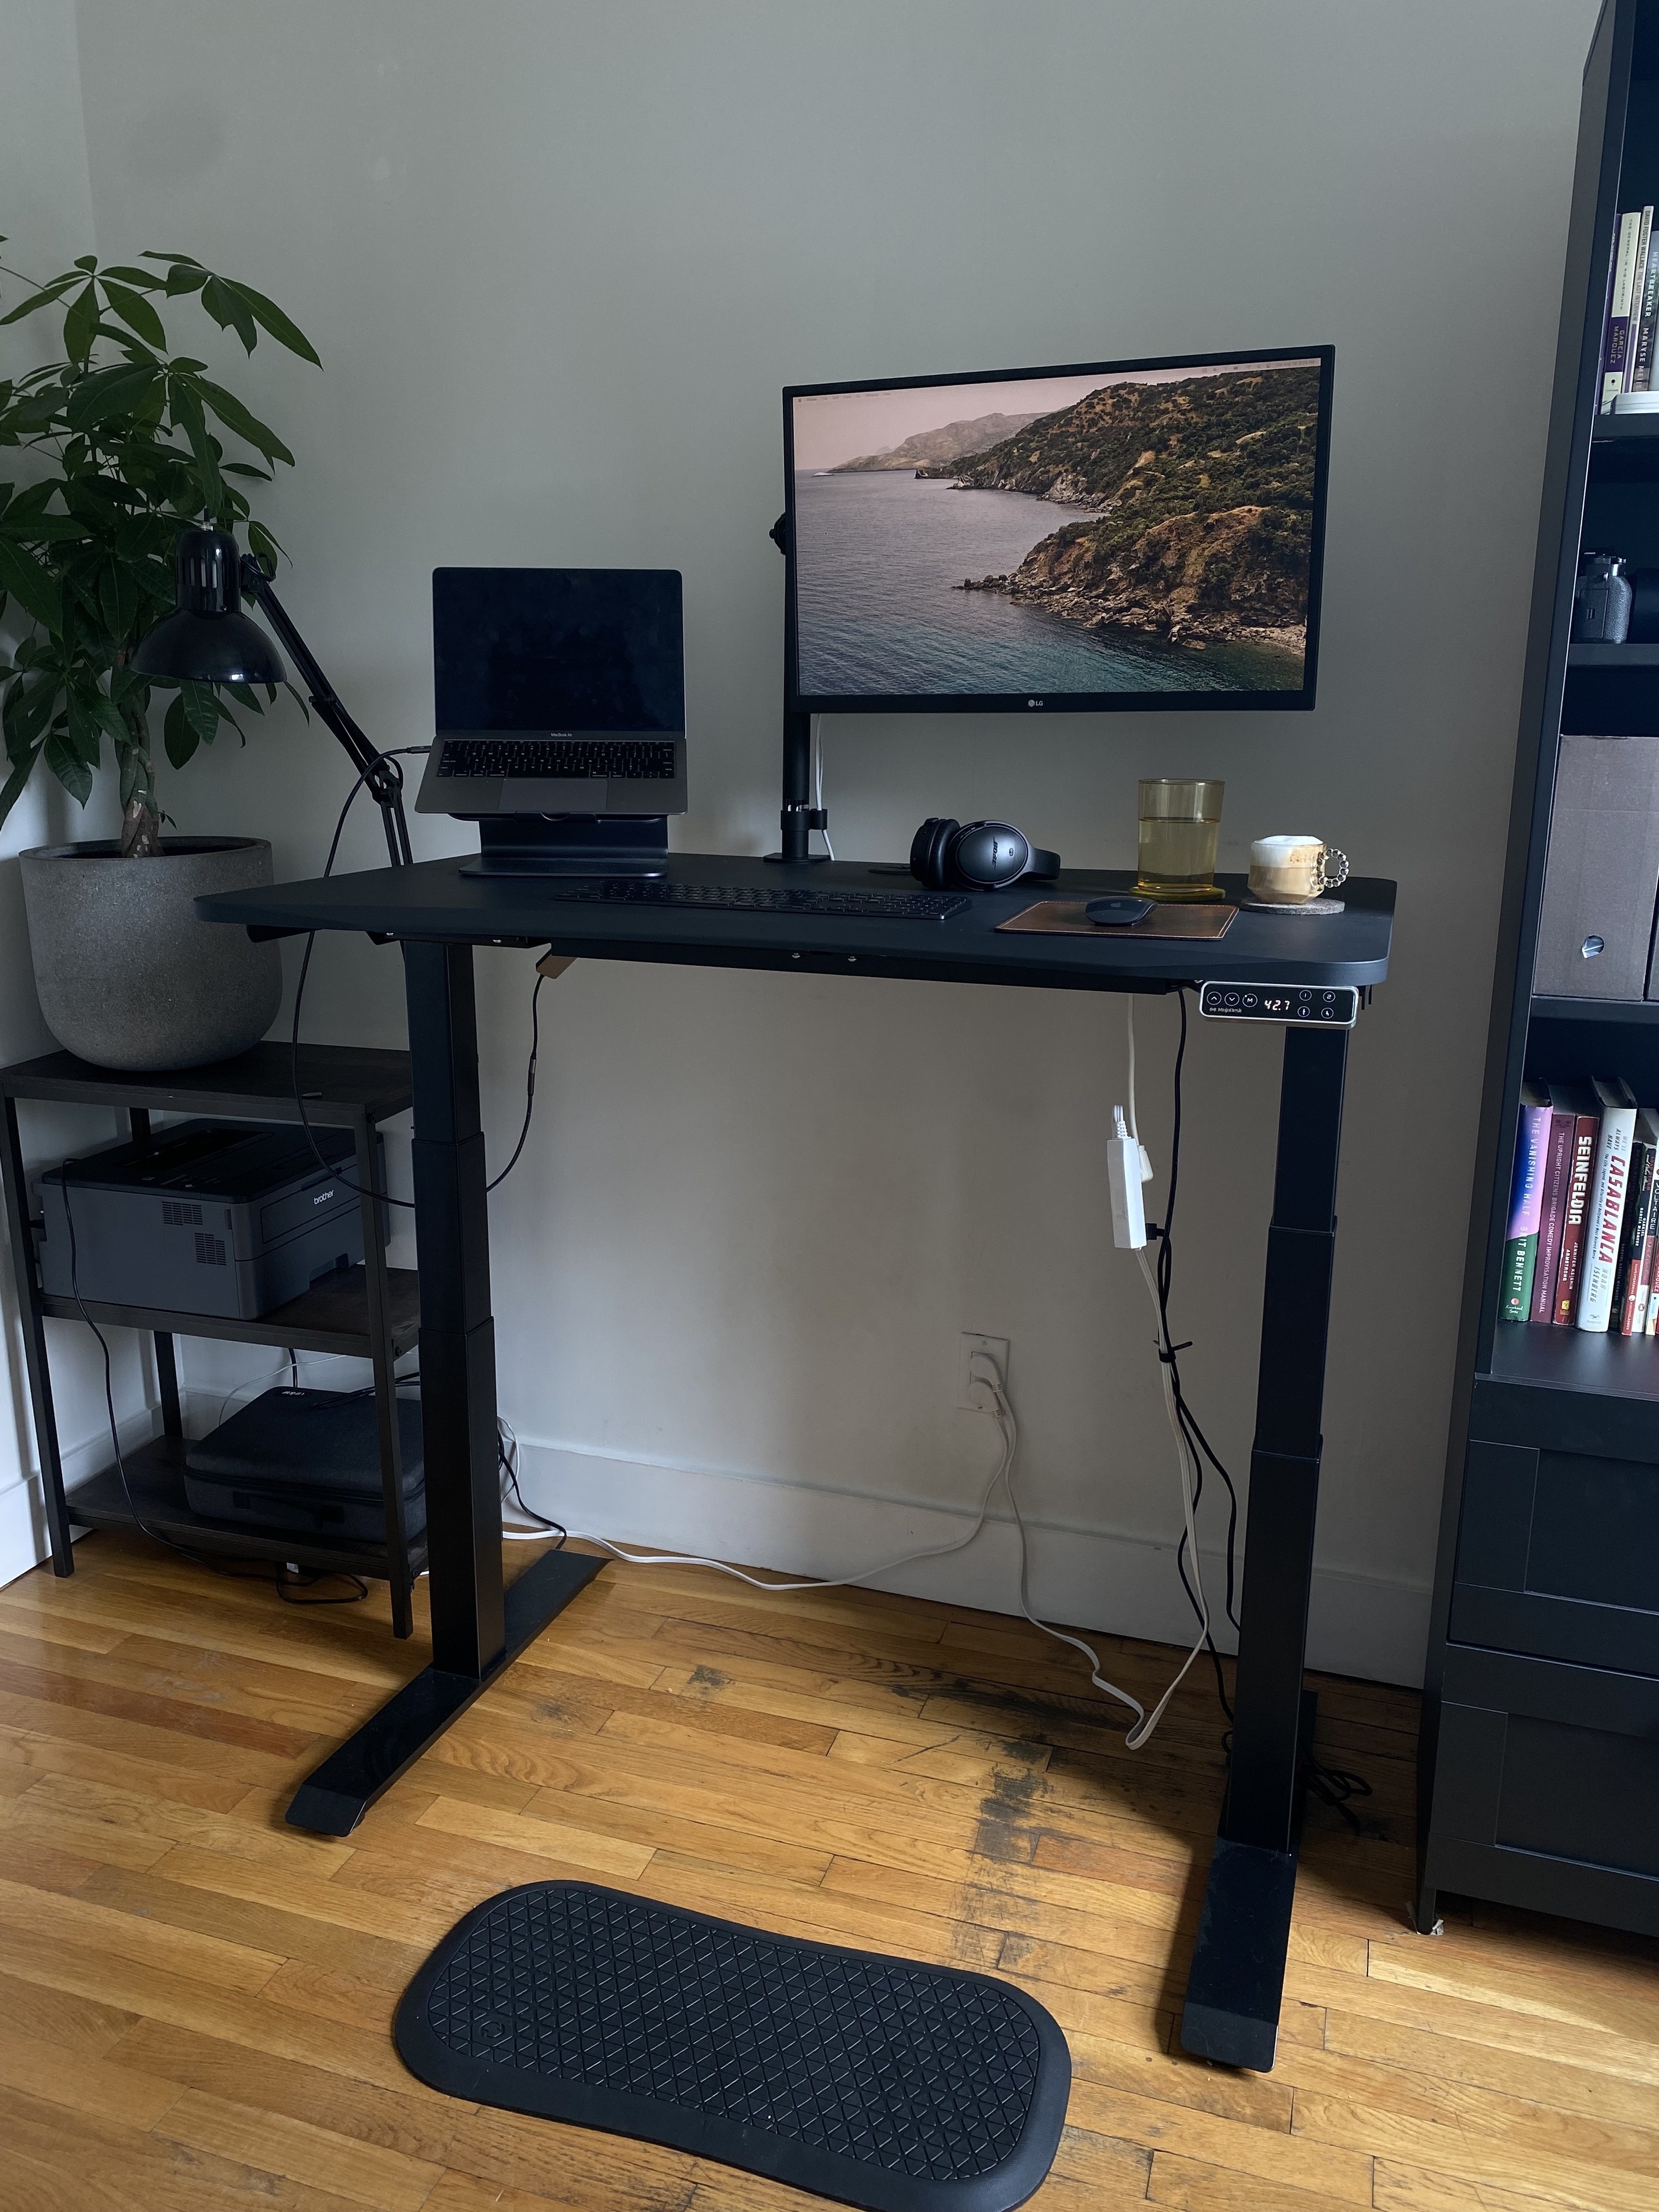 the reviewer&#x27;s image of the mat being used with the standing desk